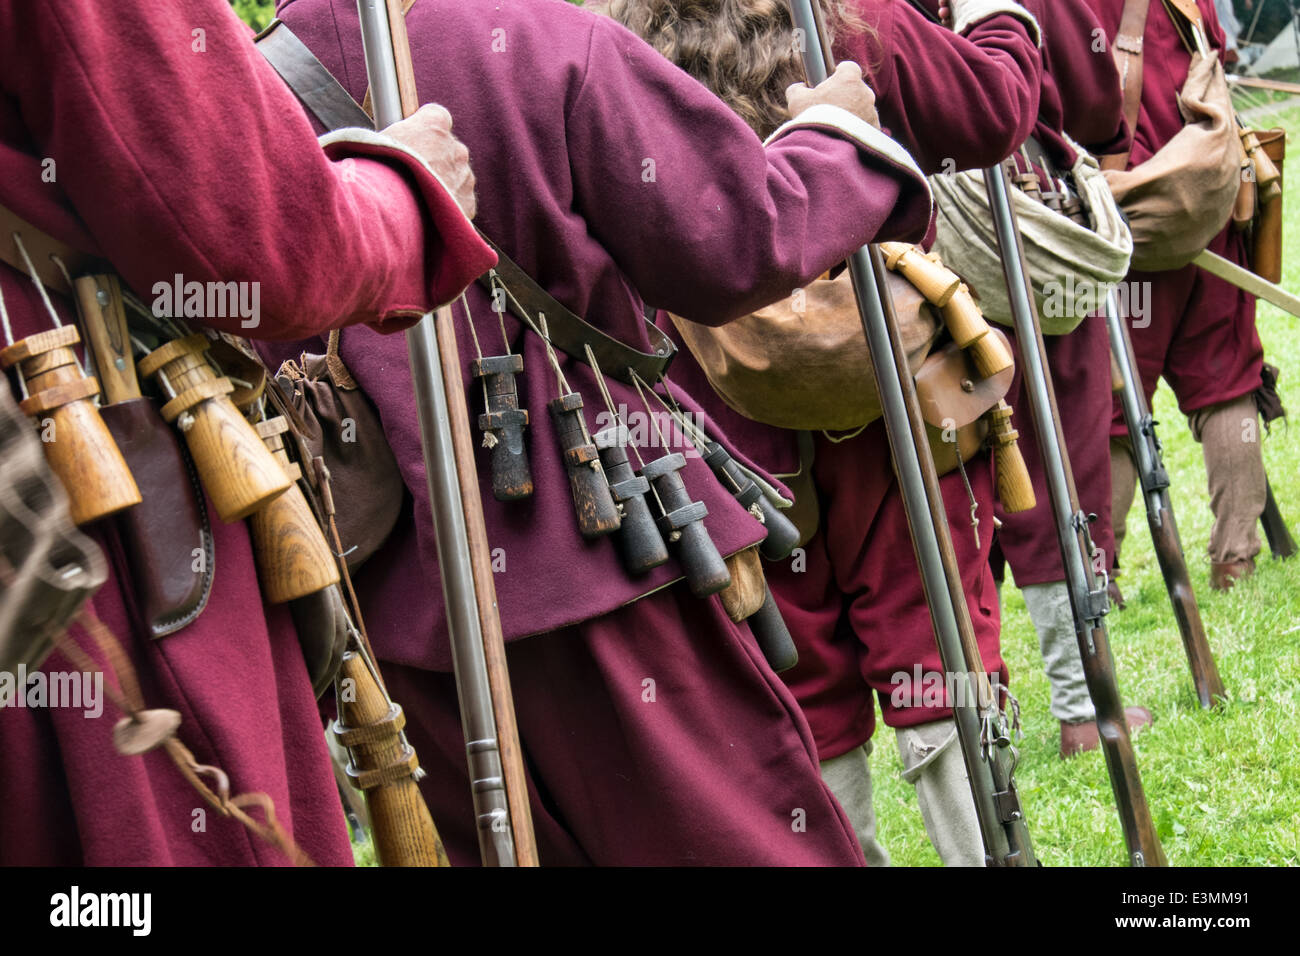 A row of Uniformed Living history reenactors portraying 17th century English civil war soldiers with equipment Stock Photo